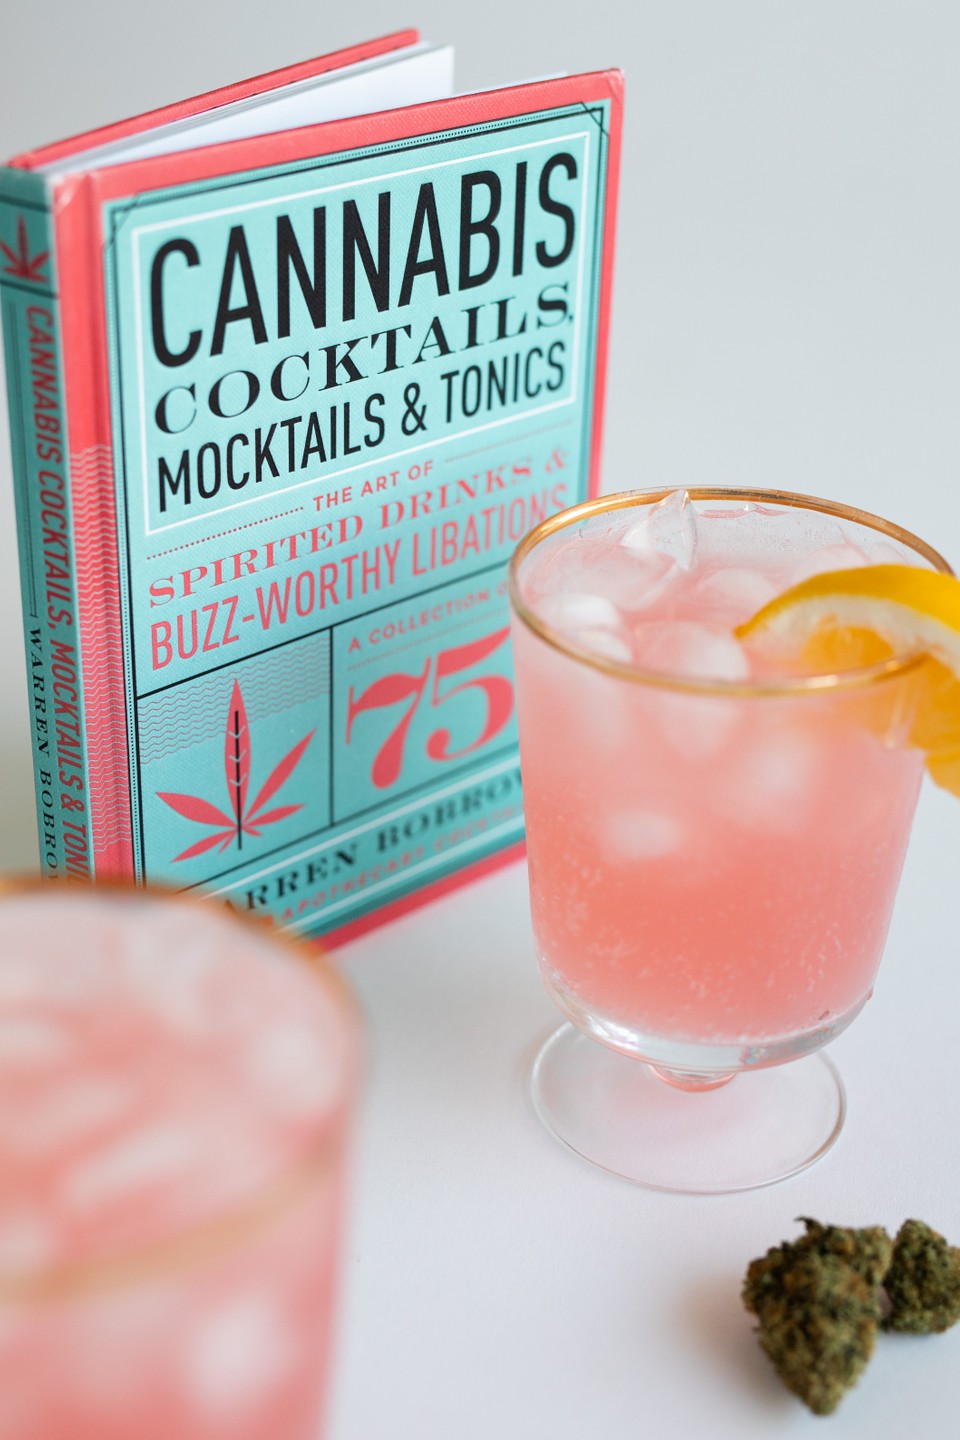 Mixing it up this Weekend with Cannabis Cocktails